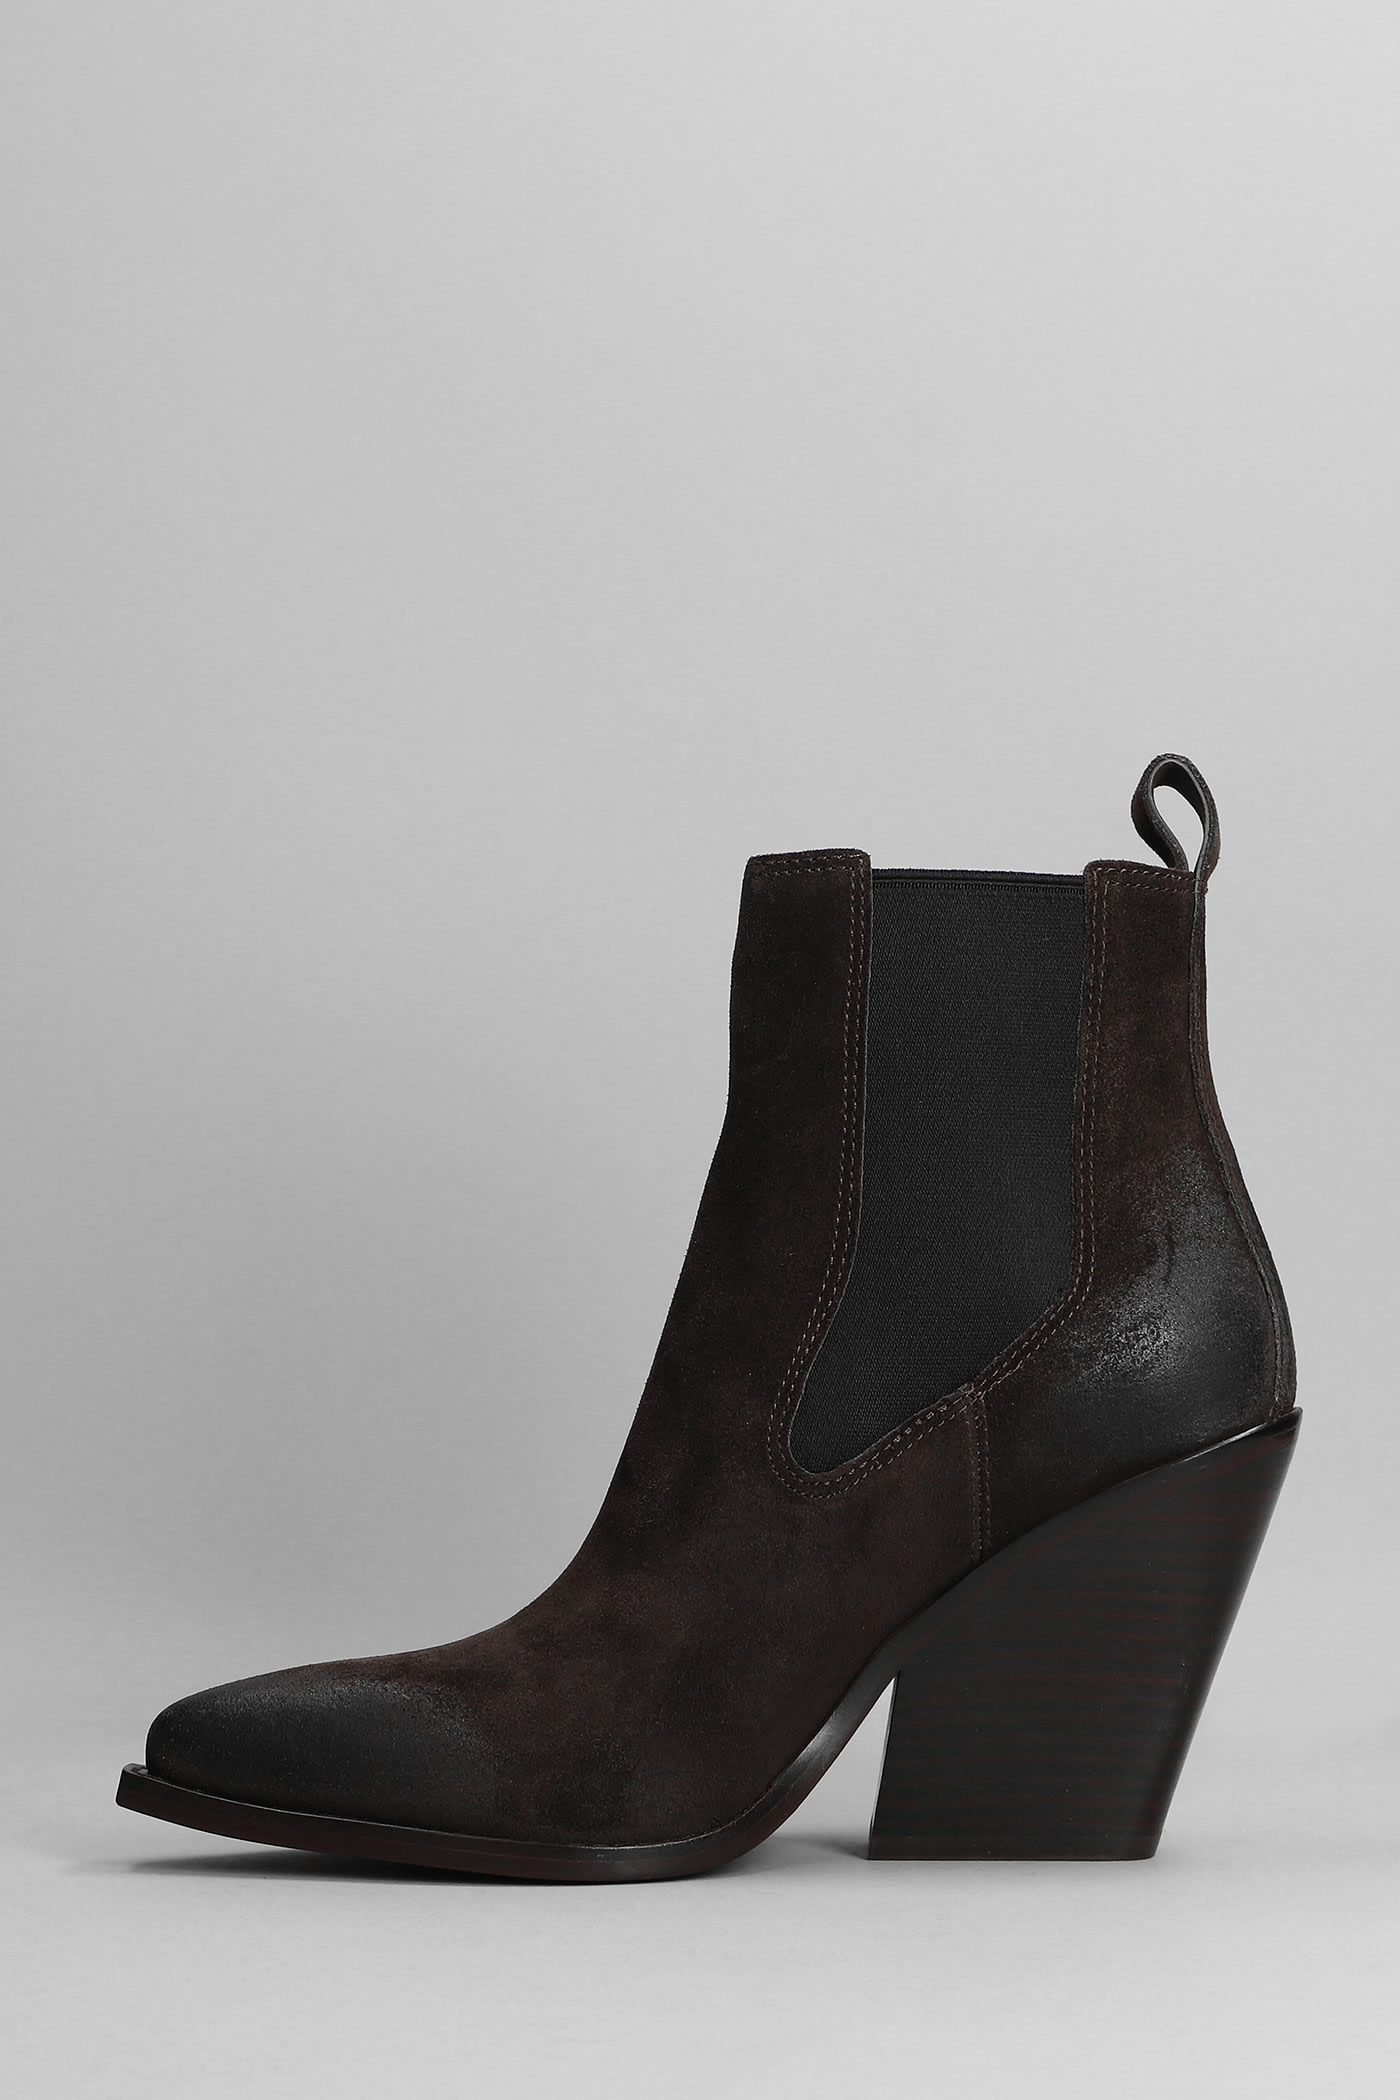 Ash Bowie Texan Ankle Boots In Brown Suede | ModeSens